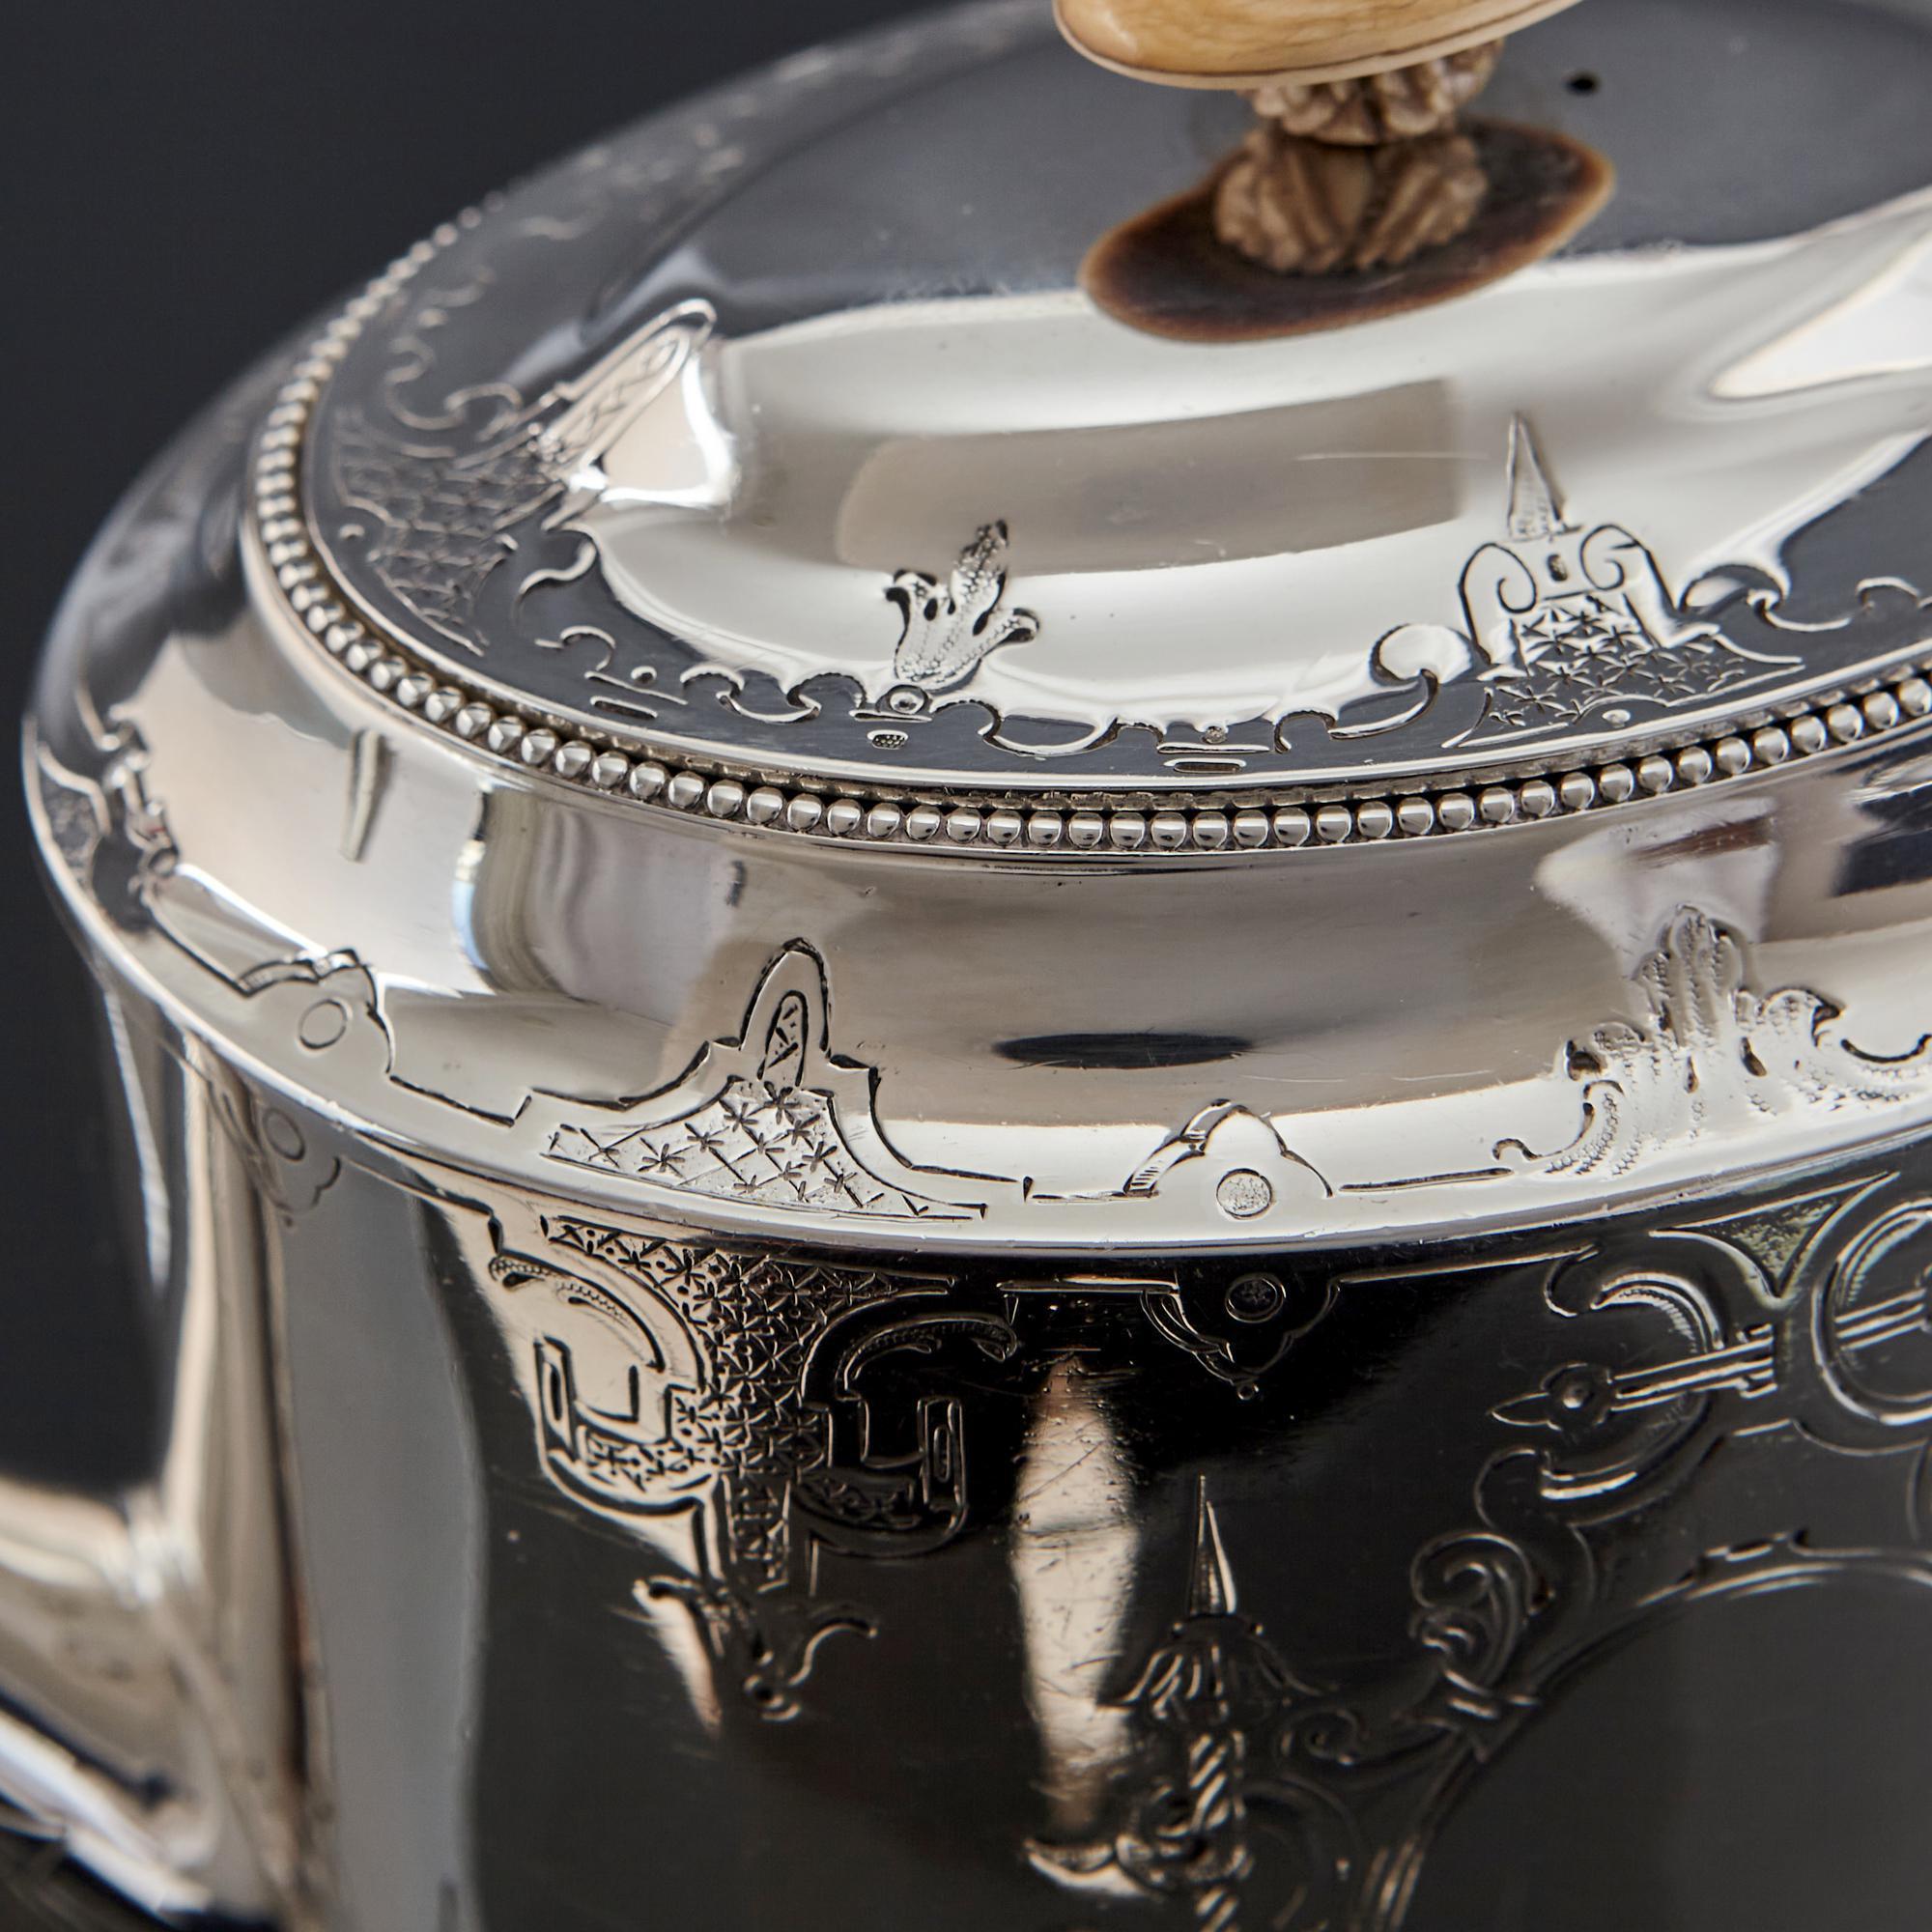 Classic late George III period antique silver teapot made by acclaimed female silversmith, Hester Bateman. The teapot features her signature bead pattern border around the rim and the teapot's body is engraved with lattice and strapwork patterns